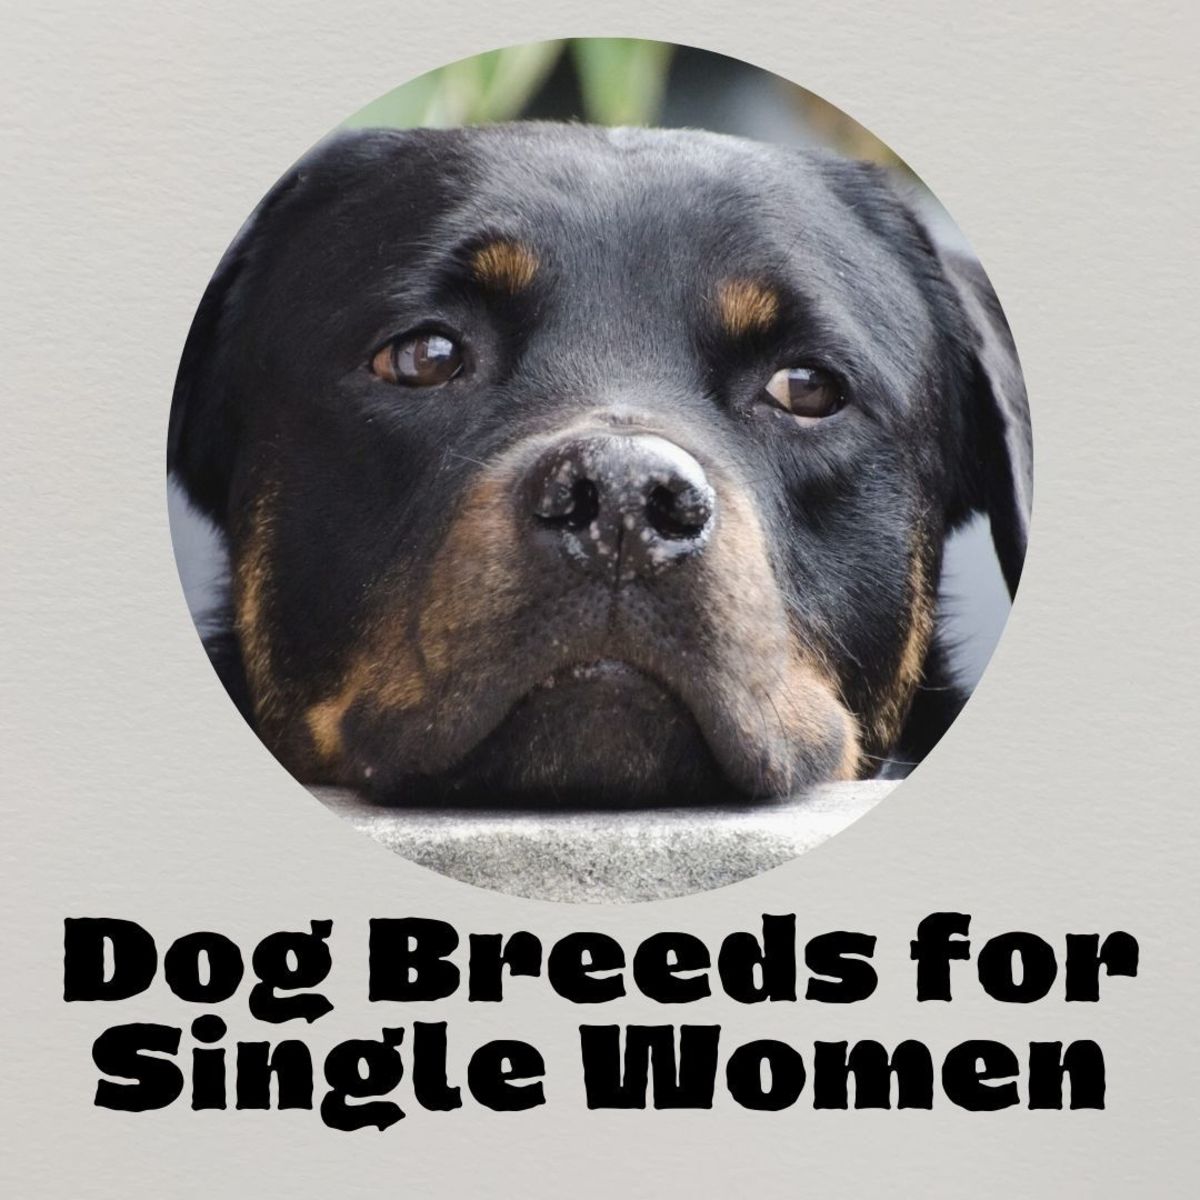 Rottweilers are loyal and eager to guard and protect—perfect for a single woman living alone.